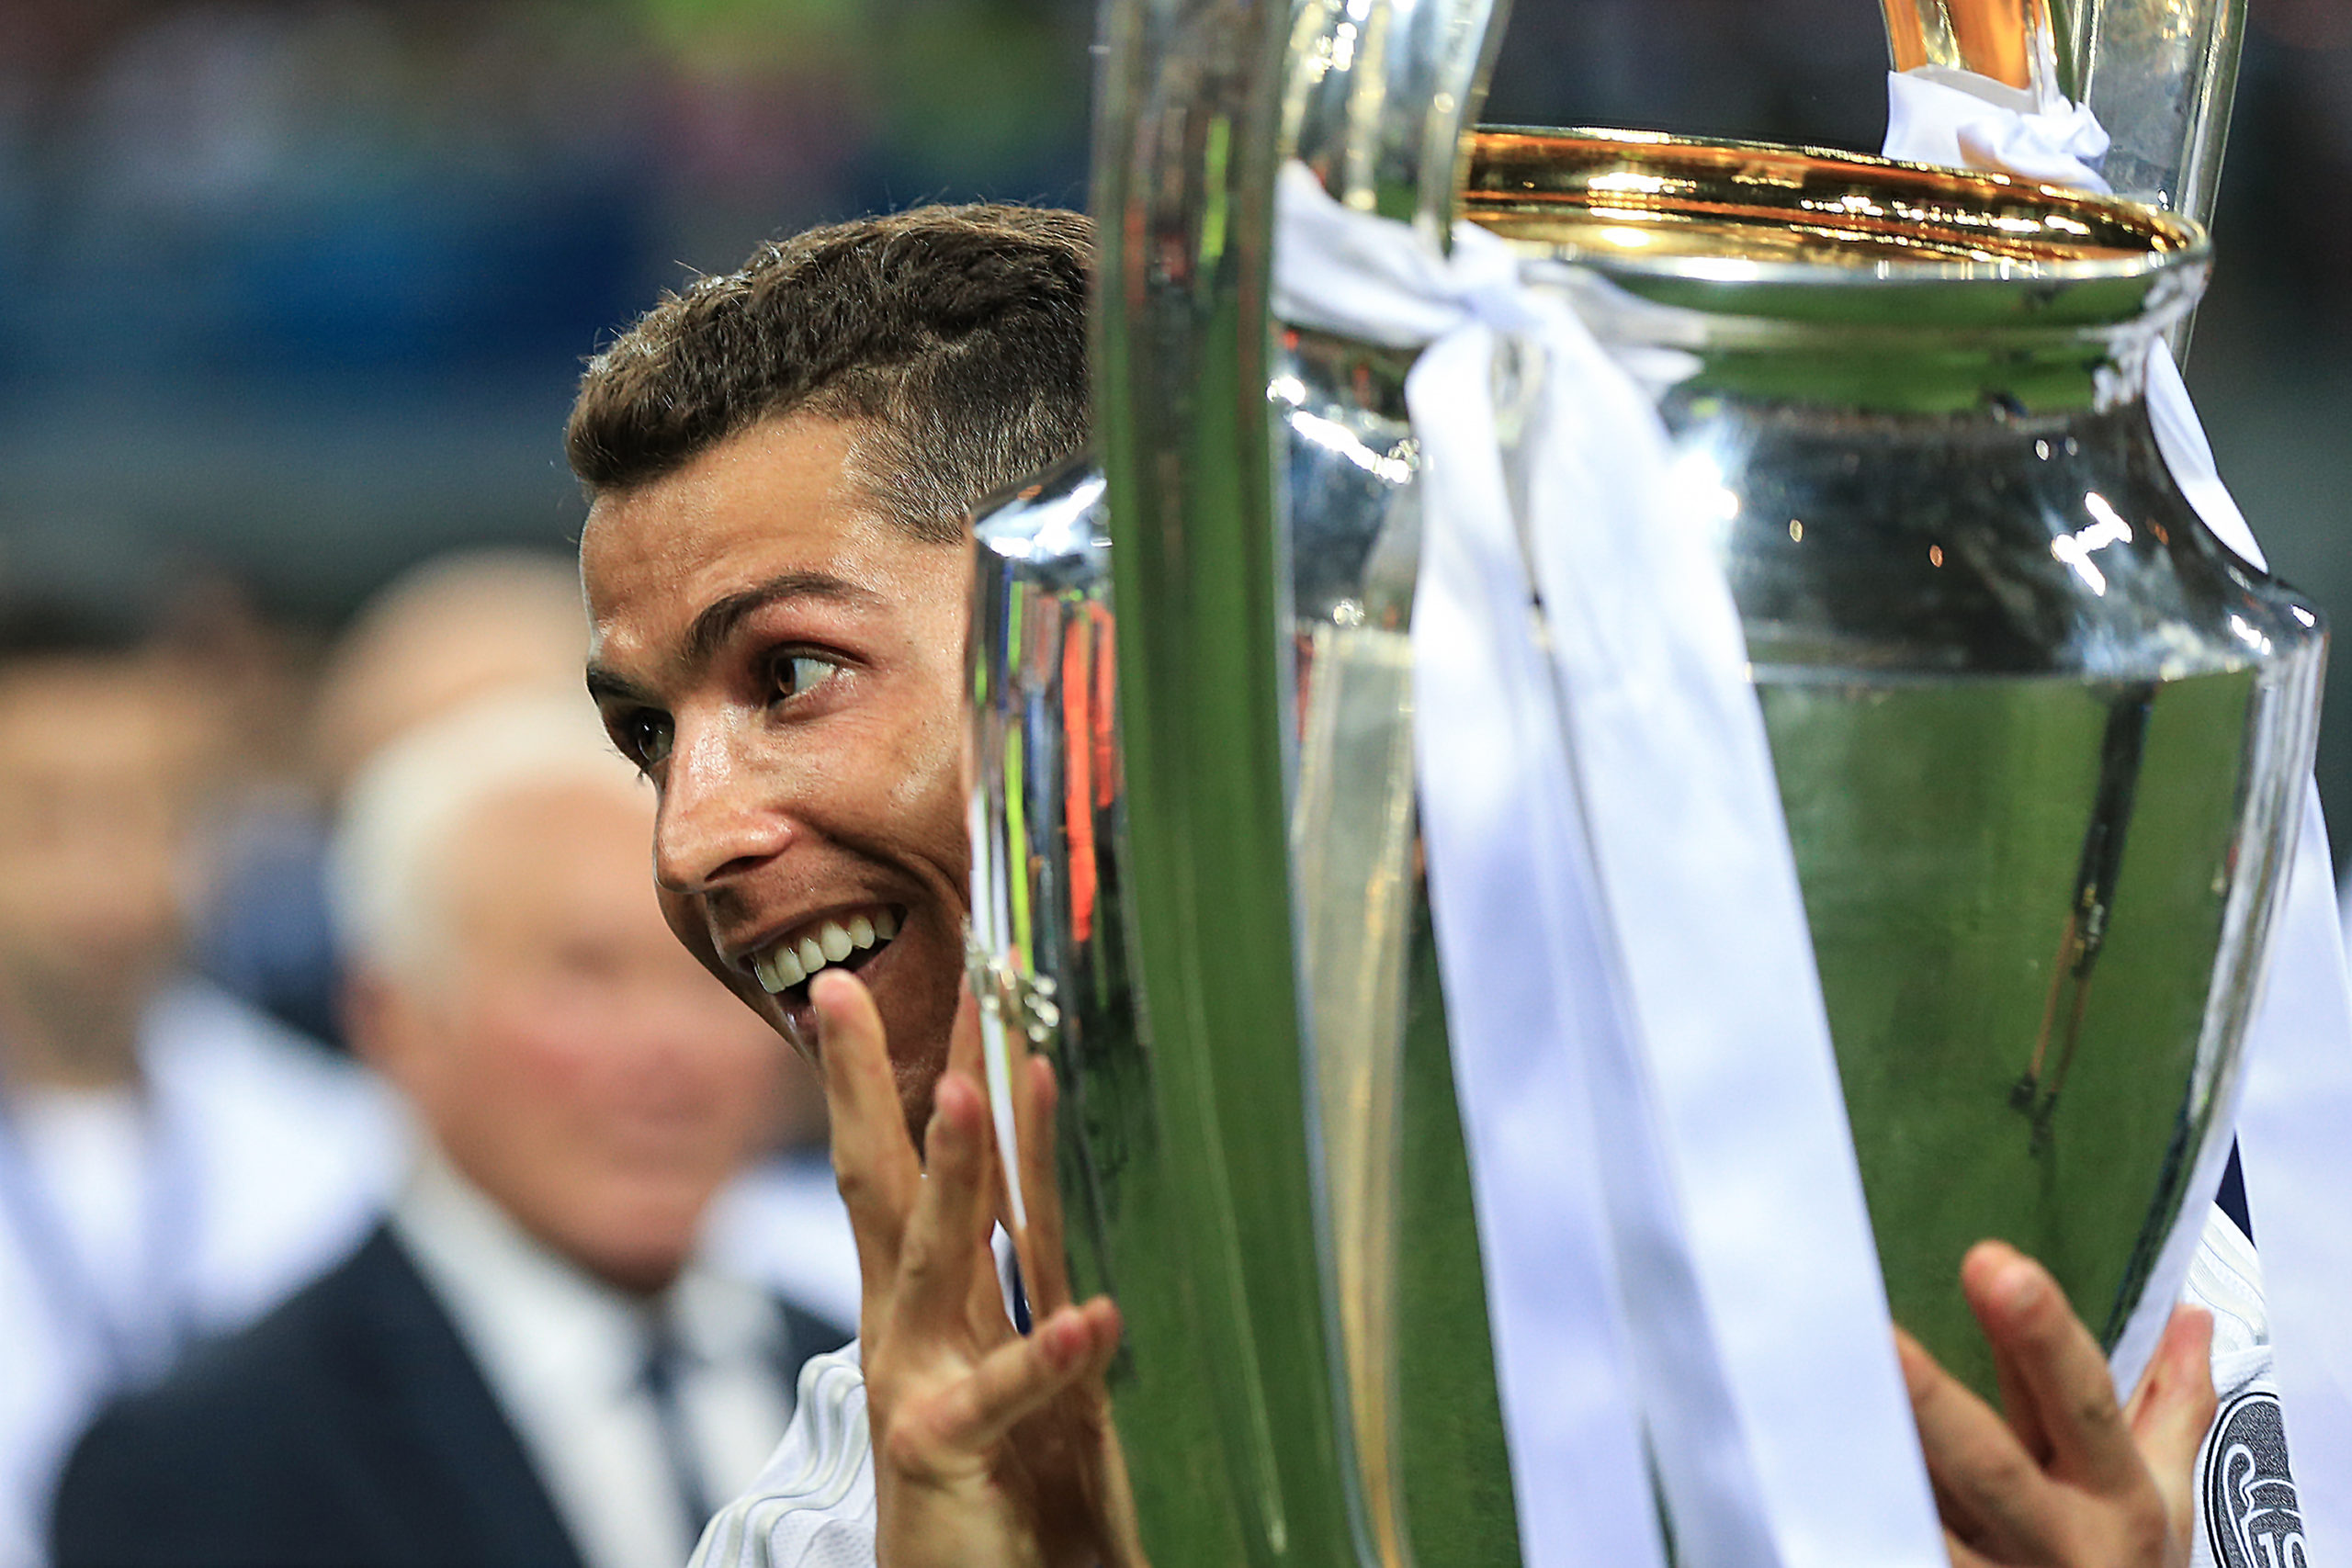 Cristiano Ronaldo's criticism has worked before at Real Madrid